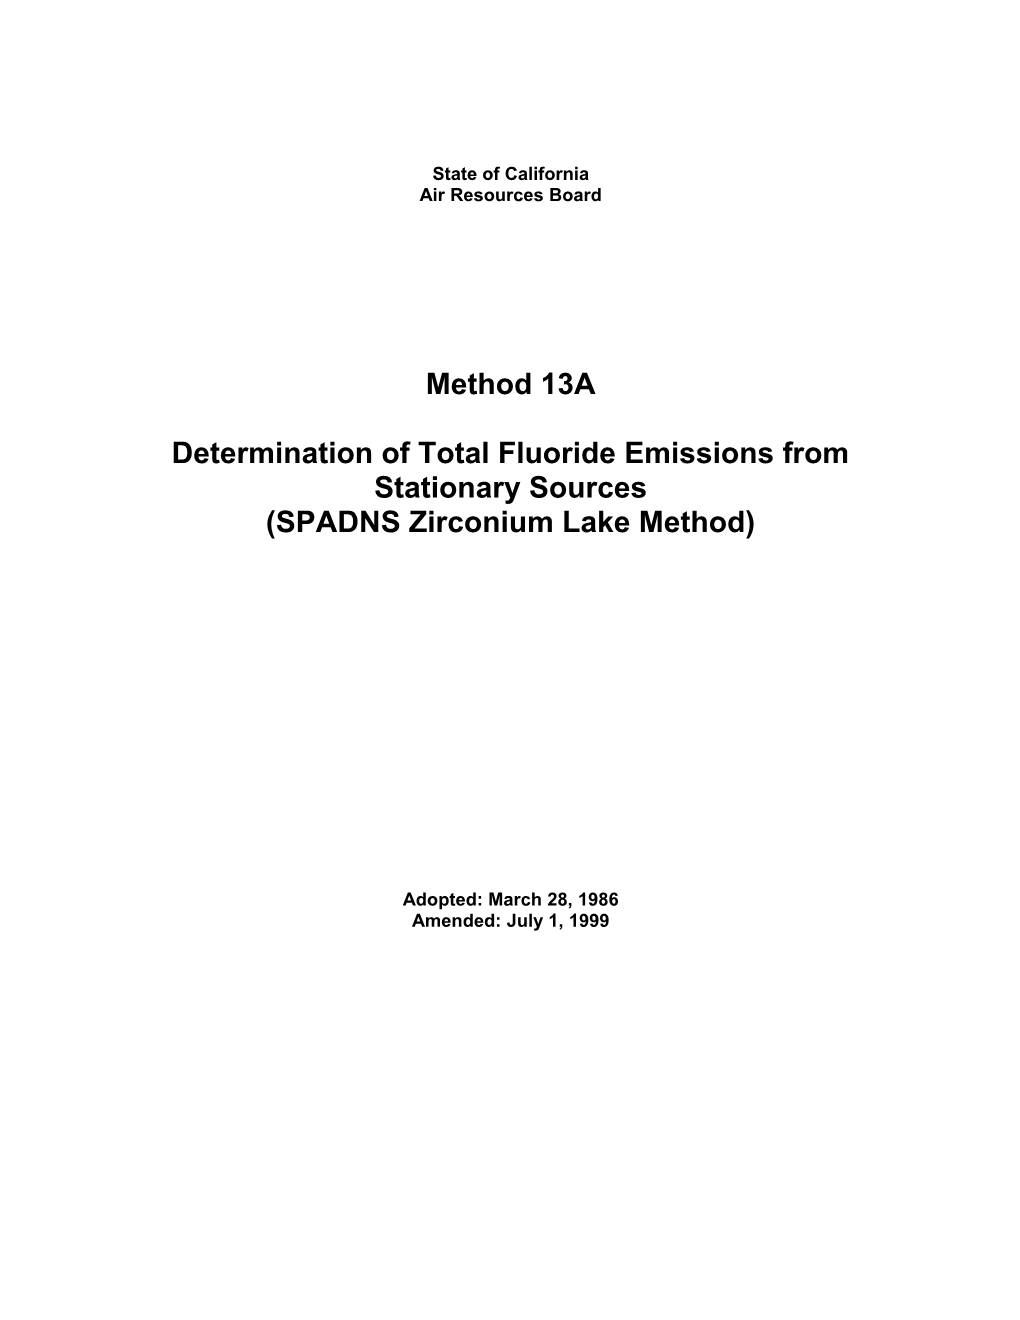 Test Method: Method 13A Determination of Total Fluoride Emissions from Stationary Sources